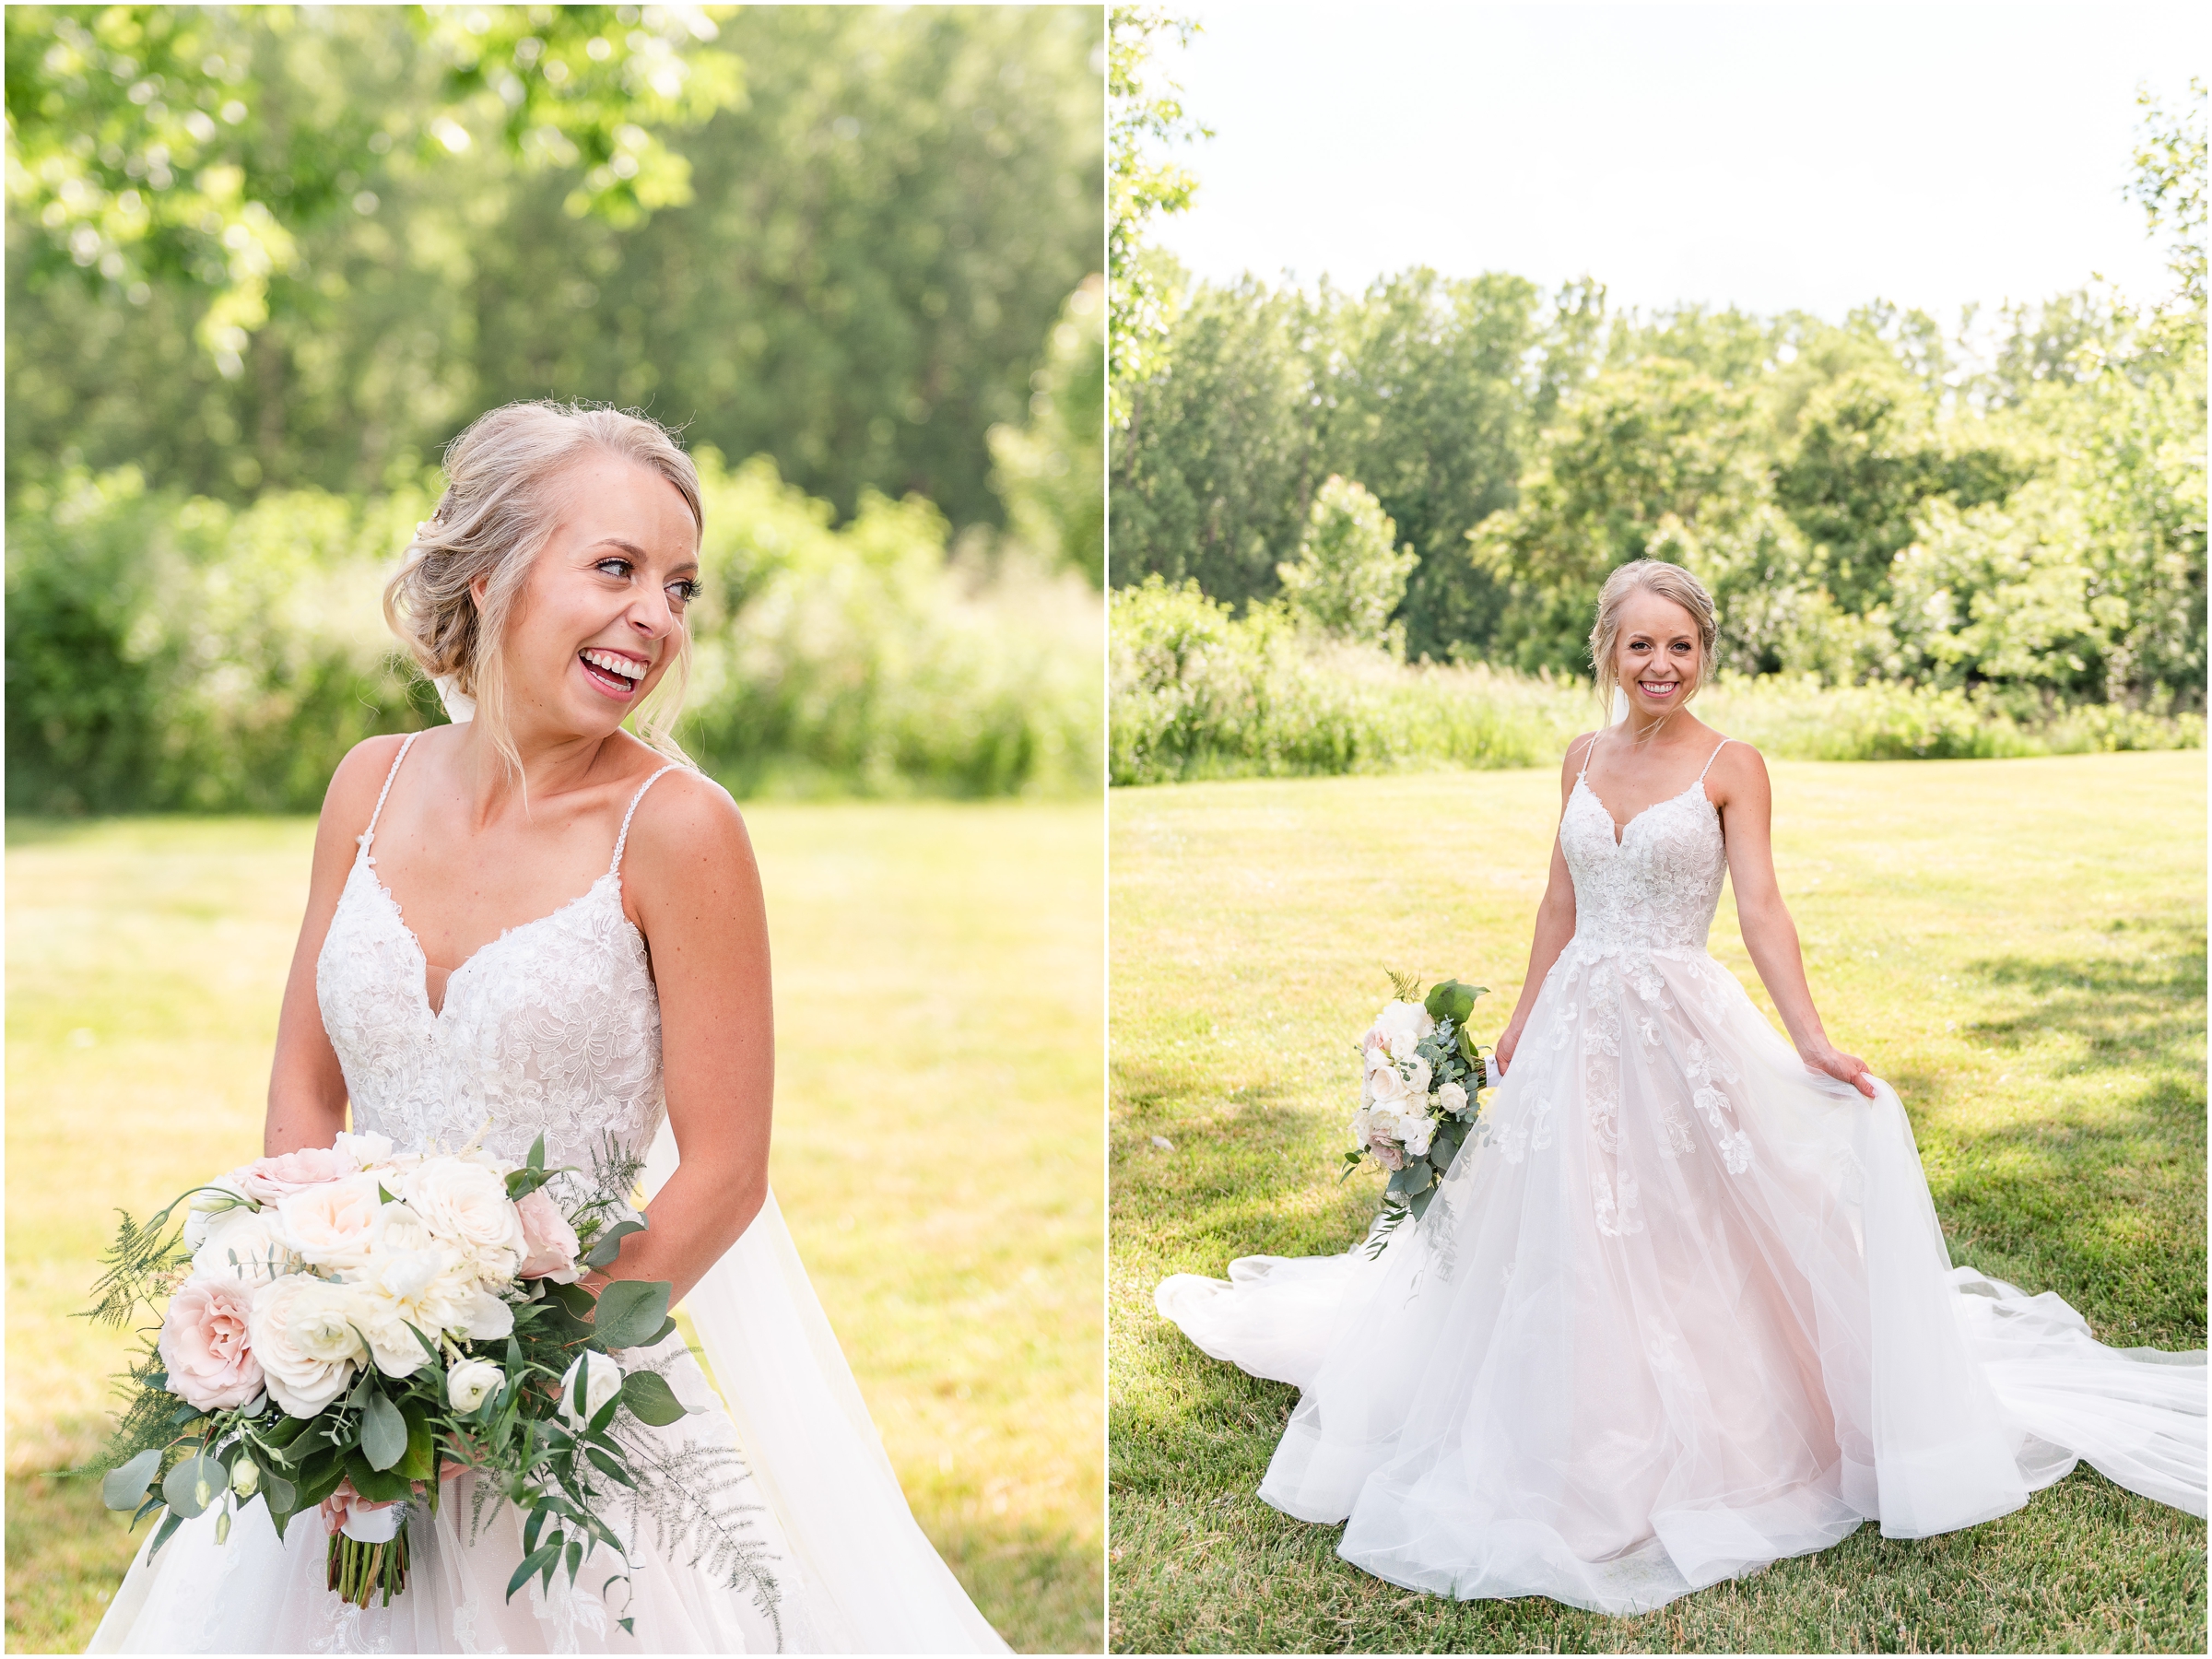 Bridal Portraits at Mustard Seed Gardens Noblesville, IN